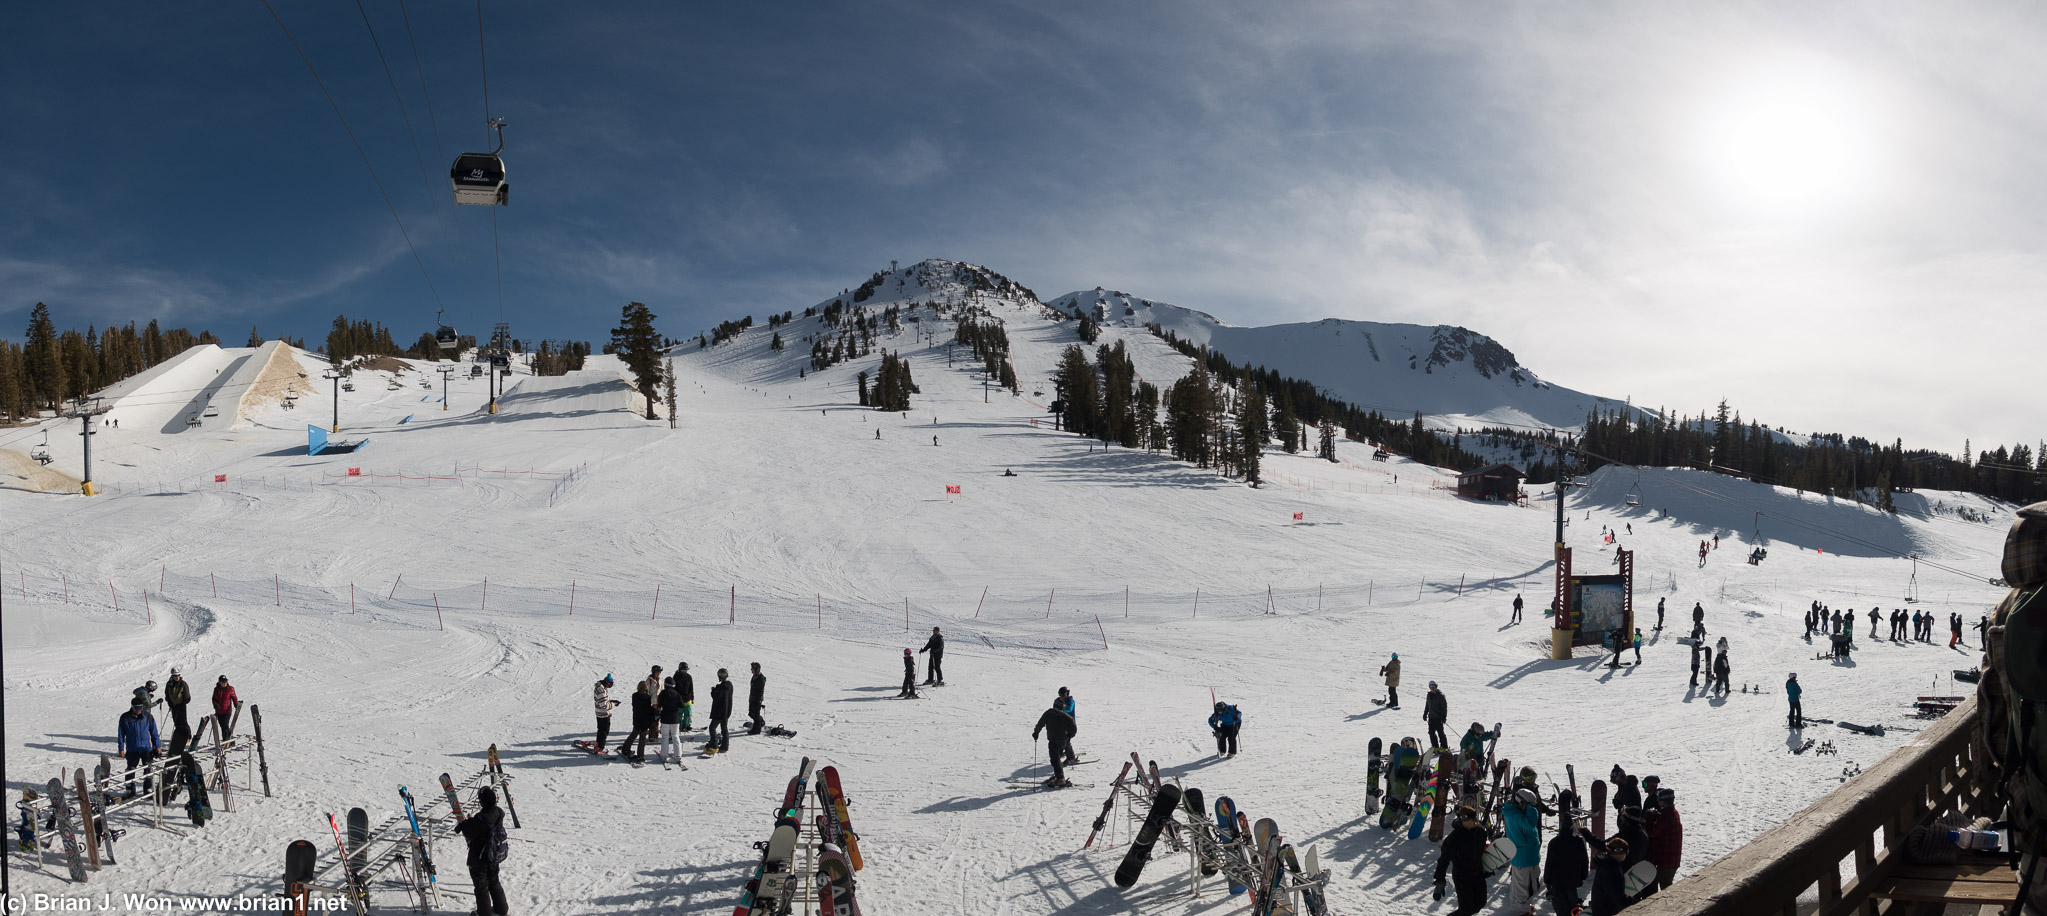 Spring conditions at Mammoth Mountain... in February.